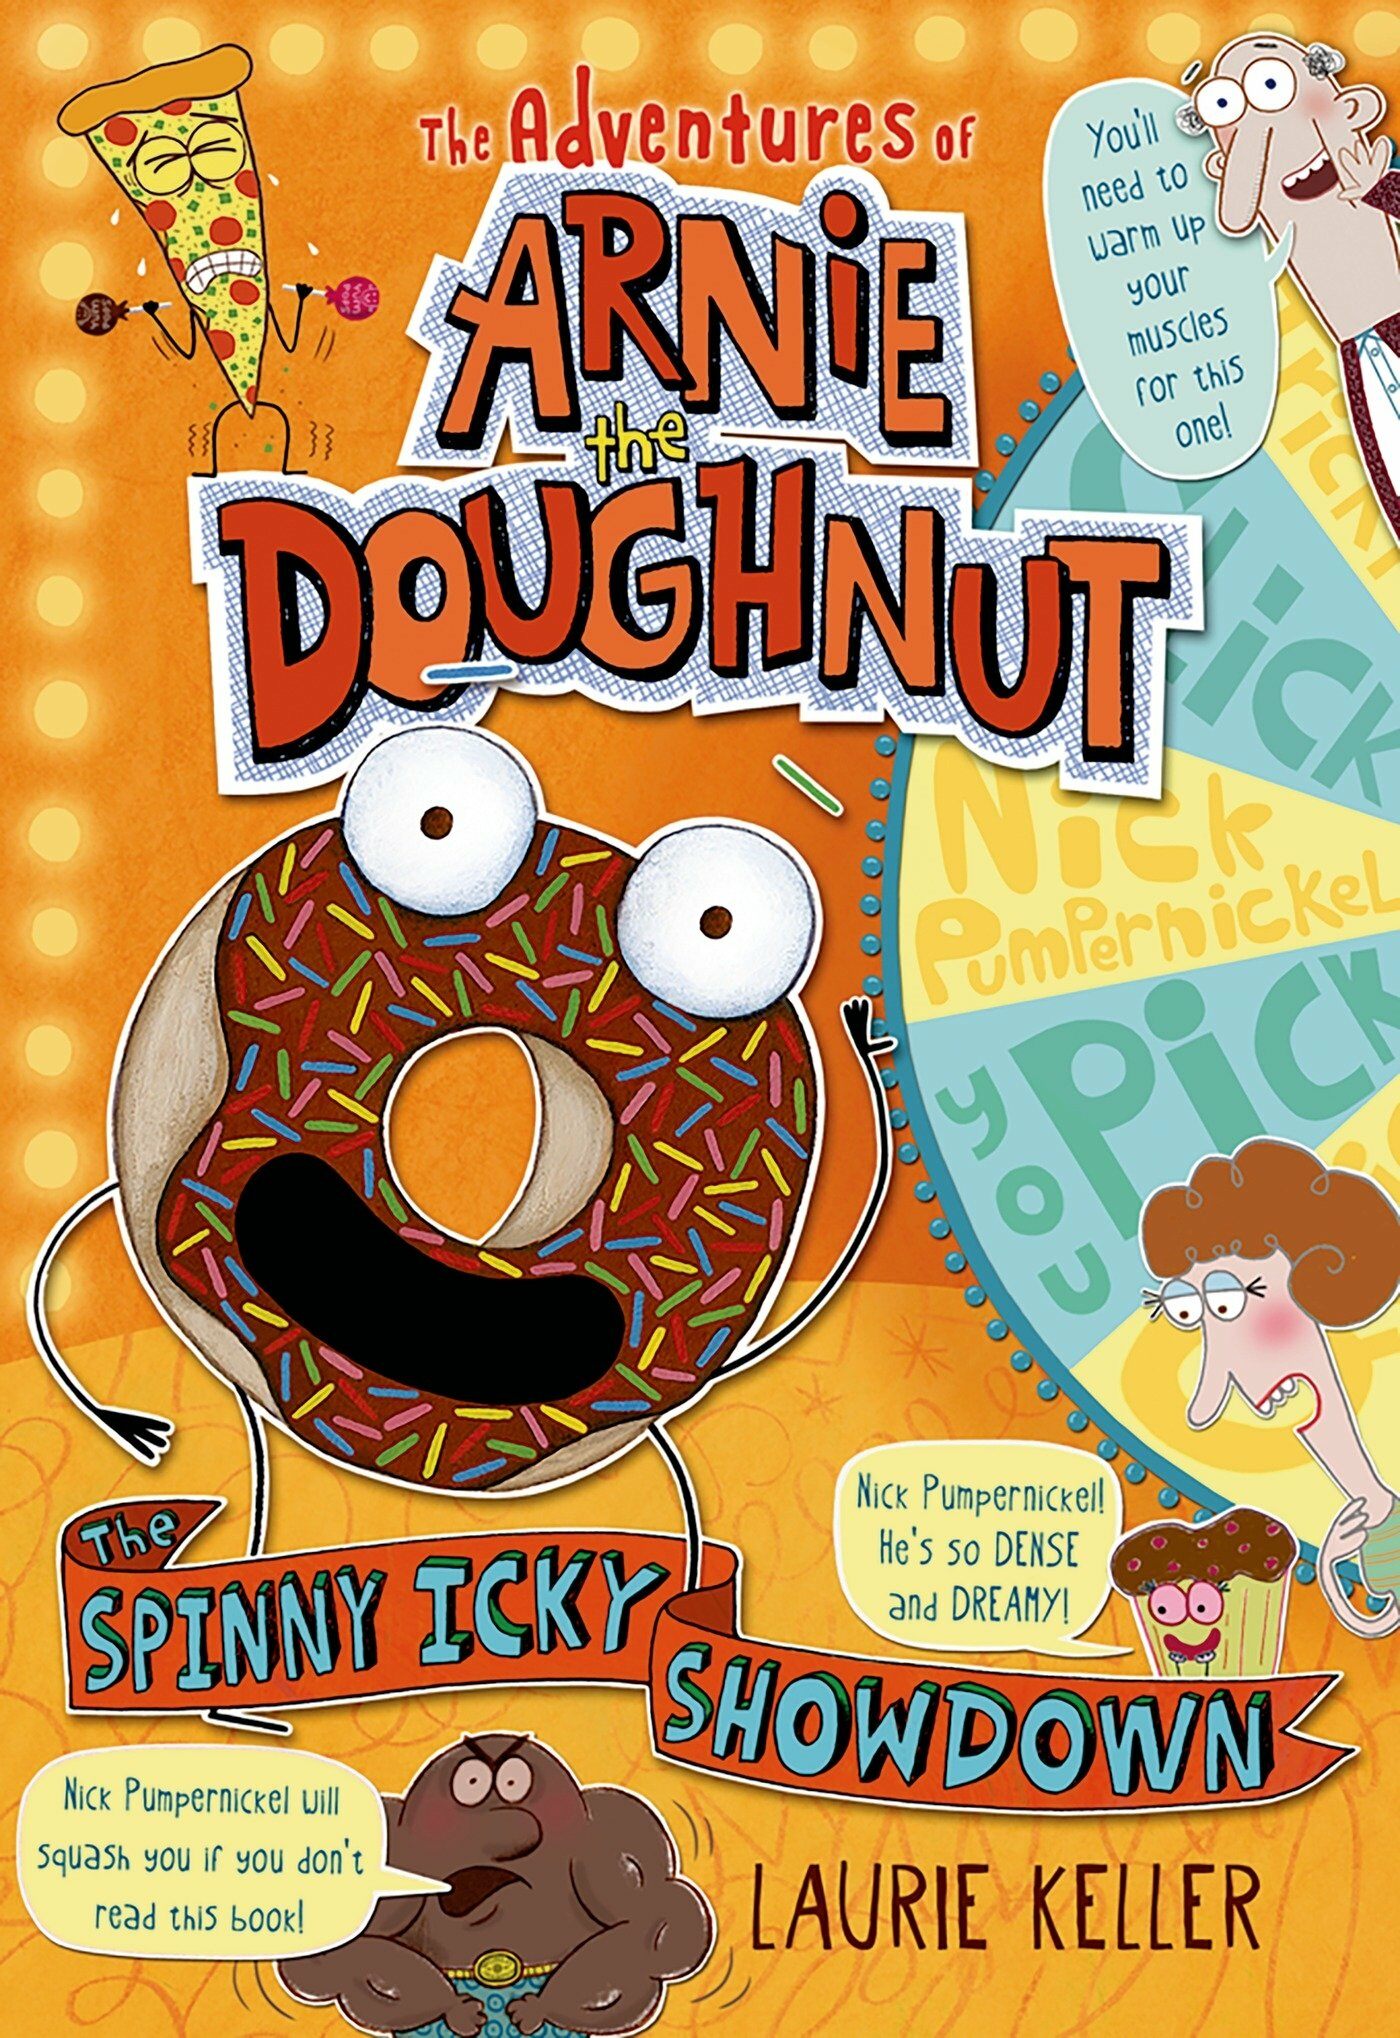 The Spinny Icky Showdown: The Adventures of Arnie the Doughnut (Paperback)